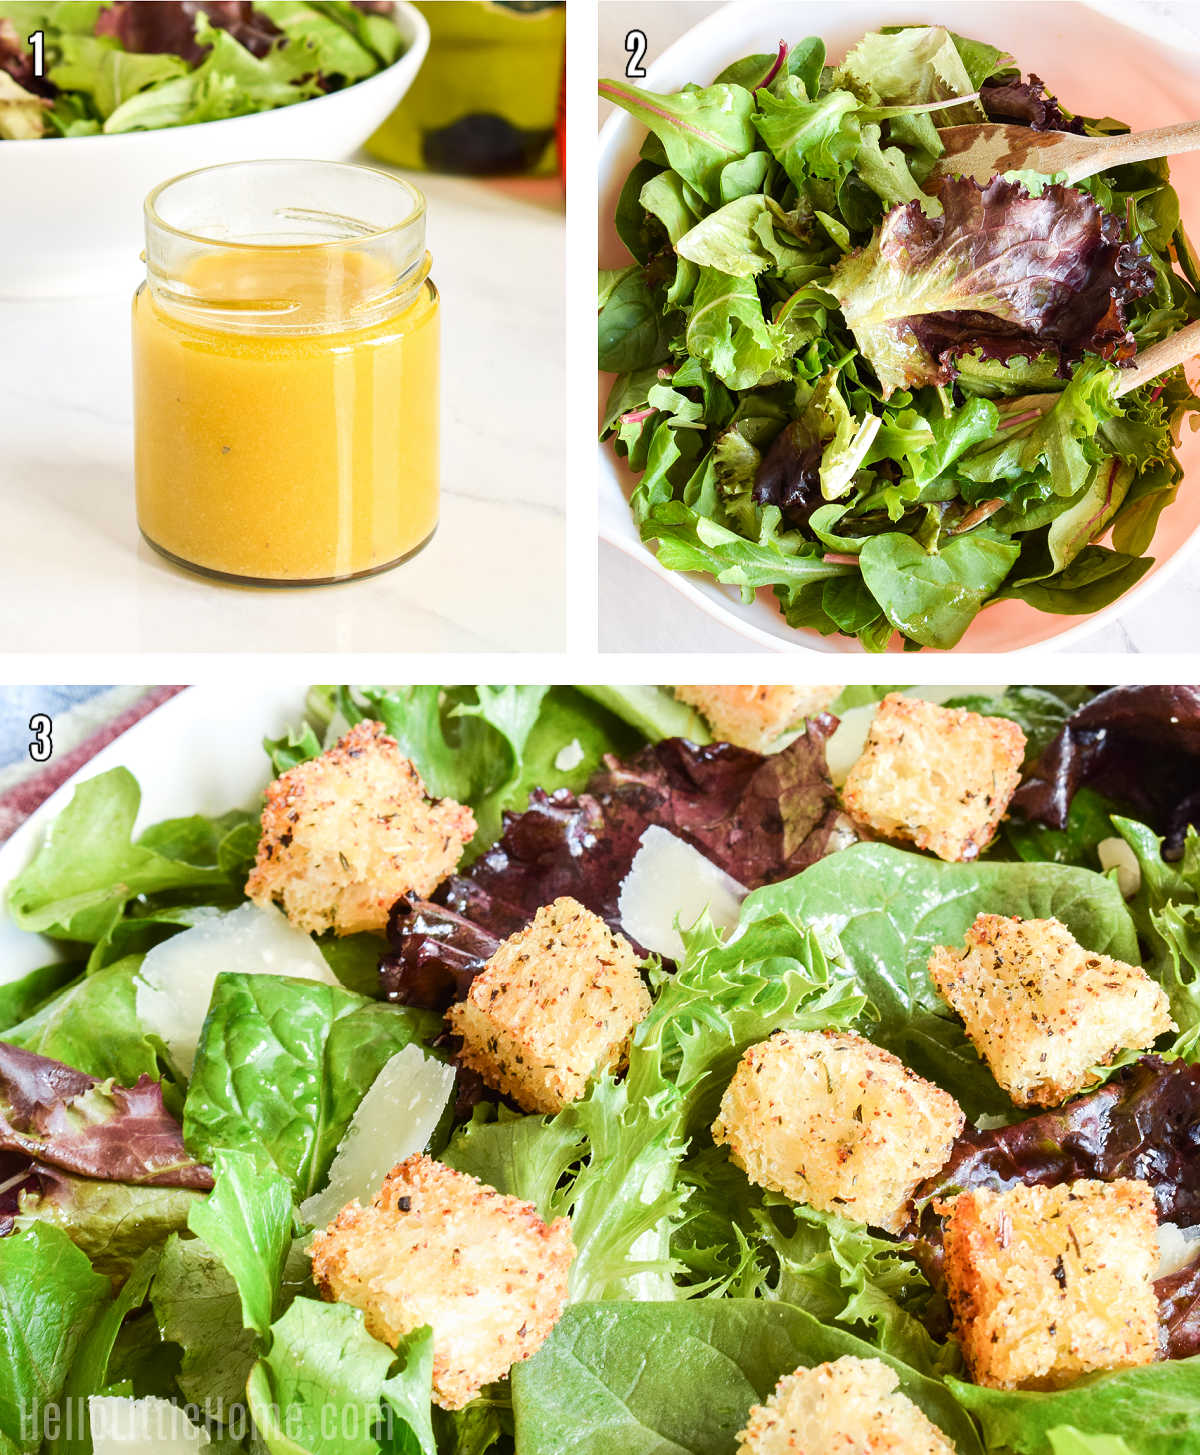 A photo collage showing how to make a green salad step-by-step.